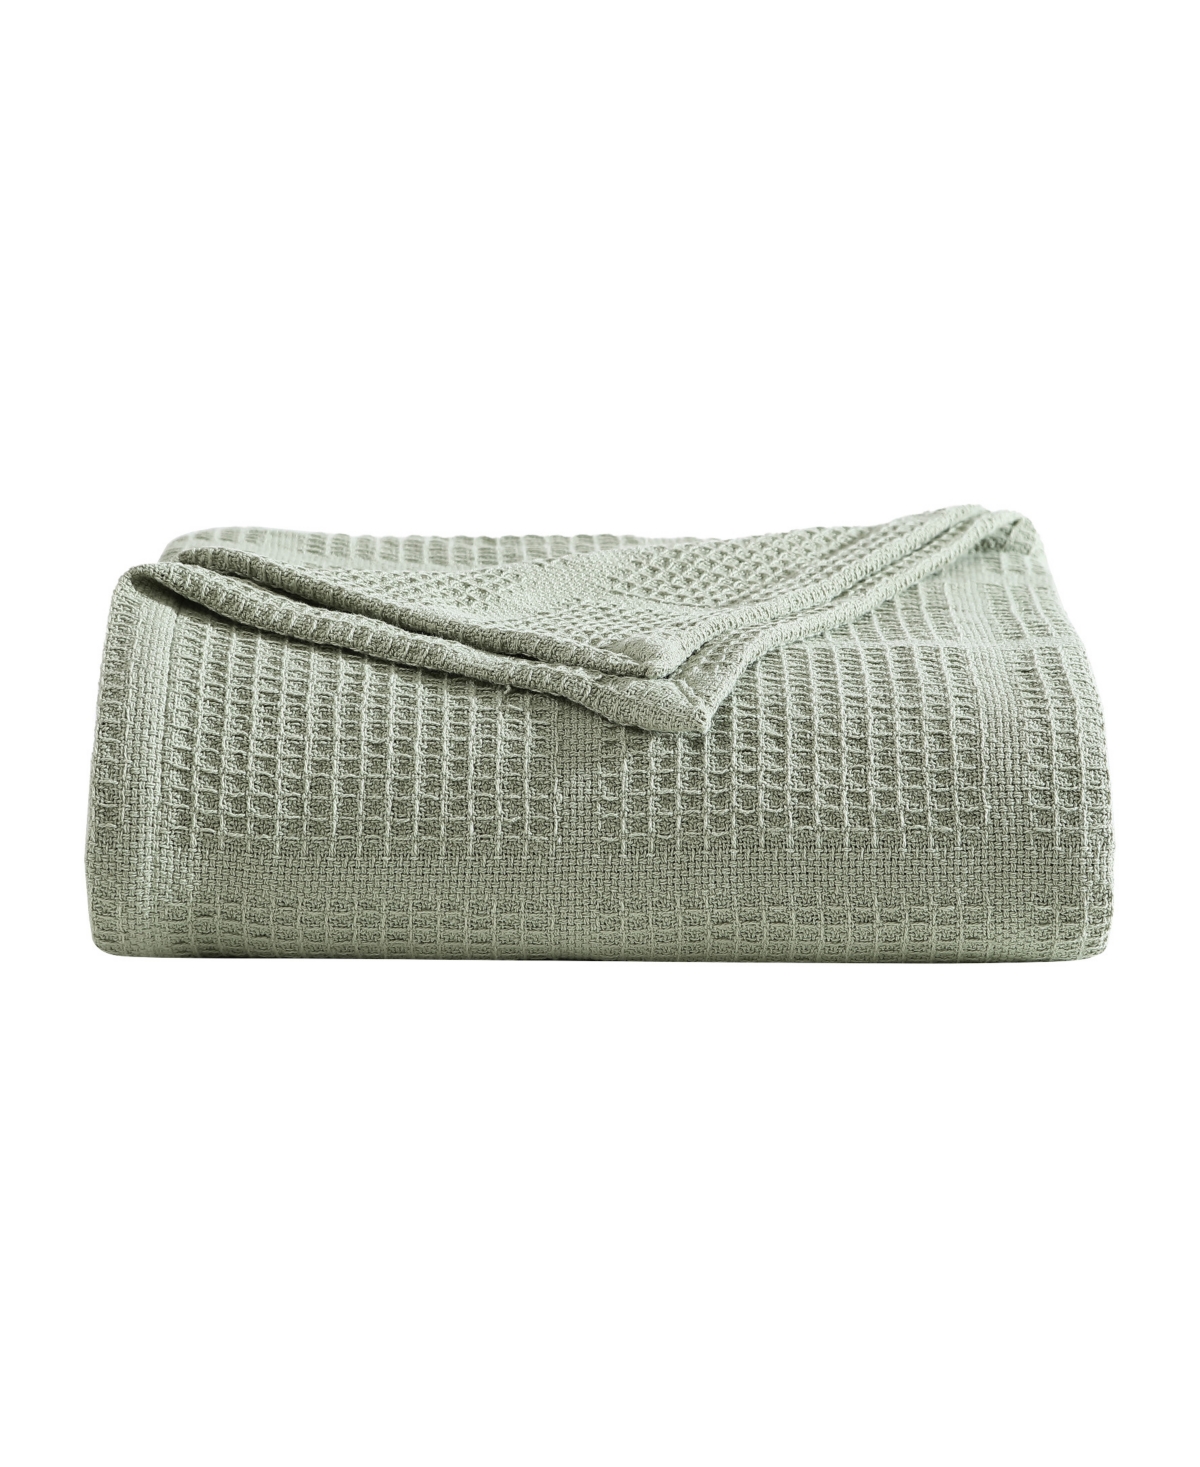 Shop Kenneth Cole New York Essentials Waffle Grid Cotton Dobby Blanket, King In Sage Green